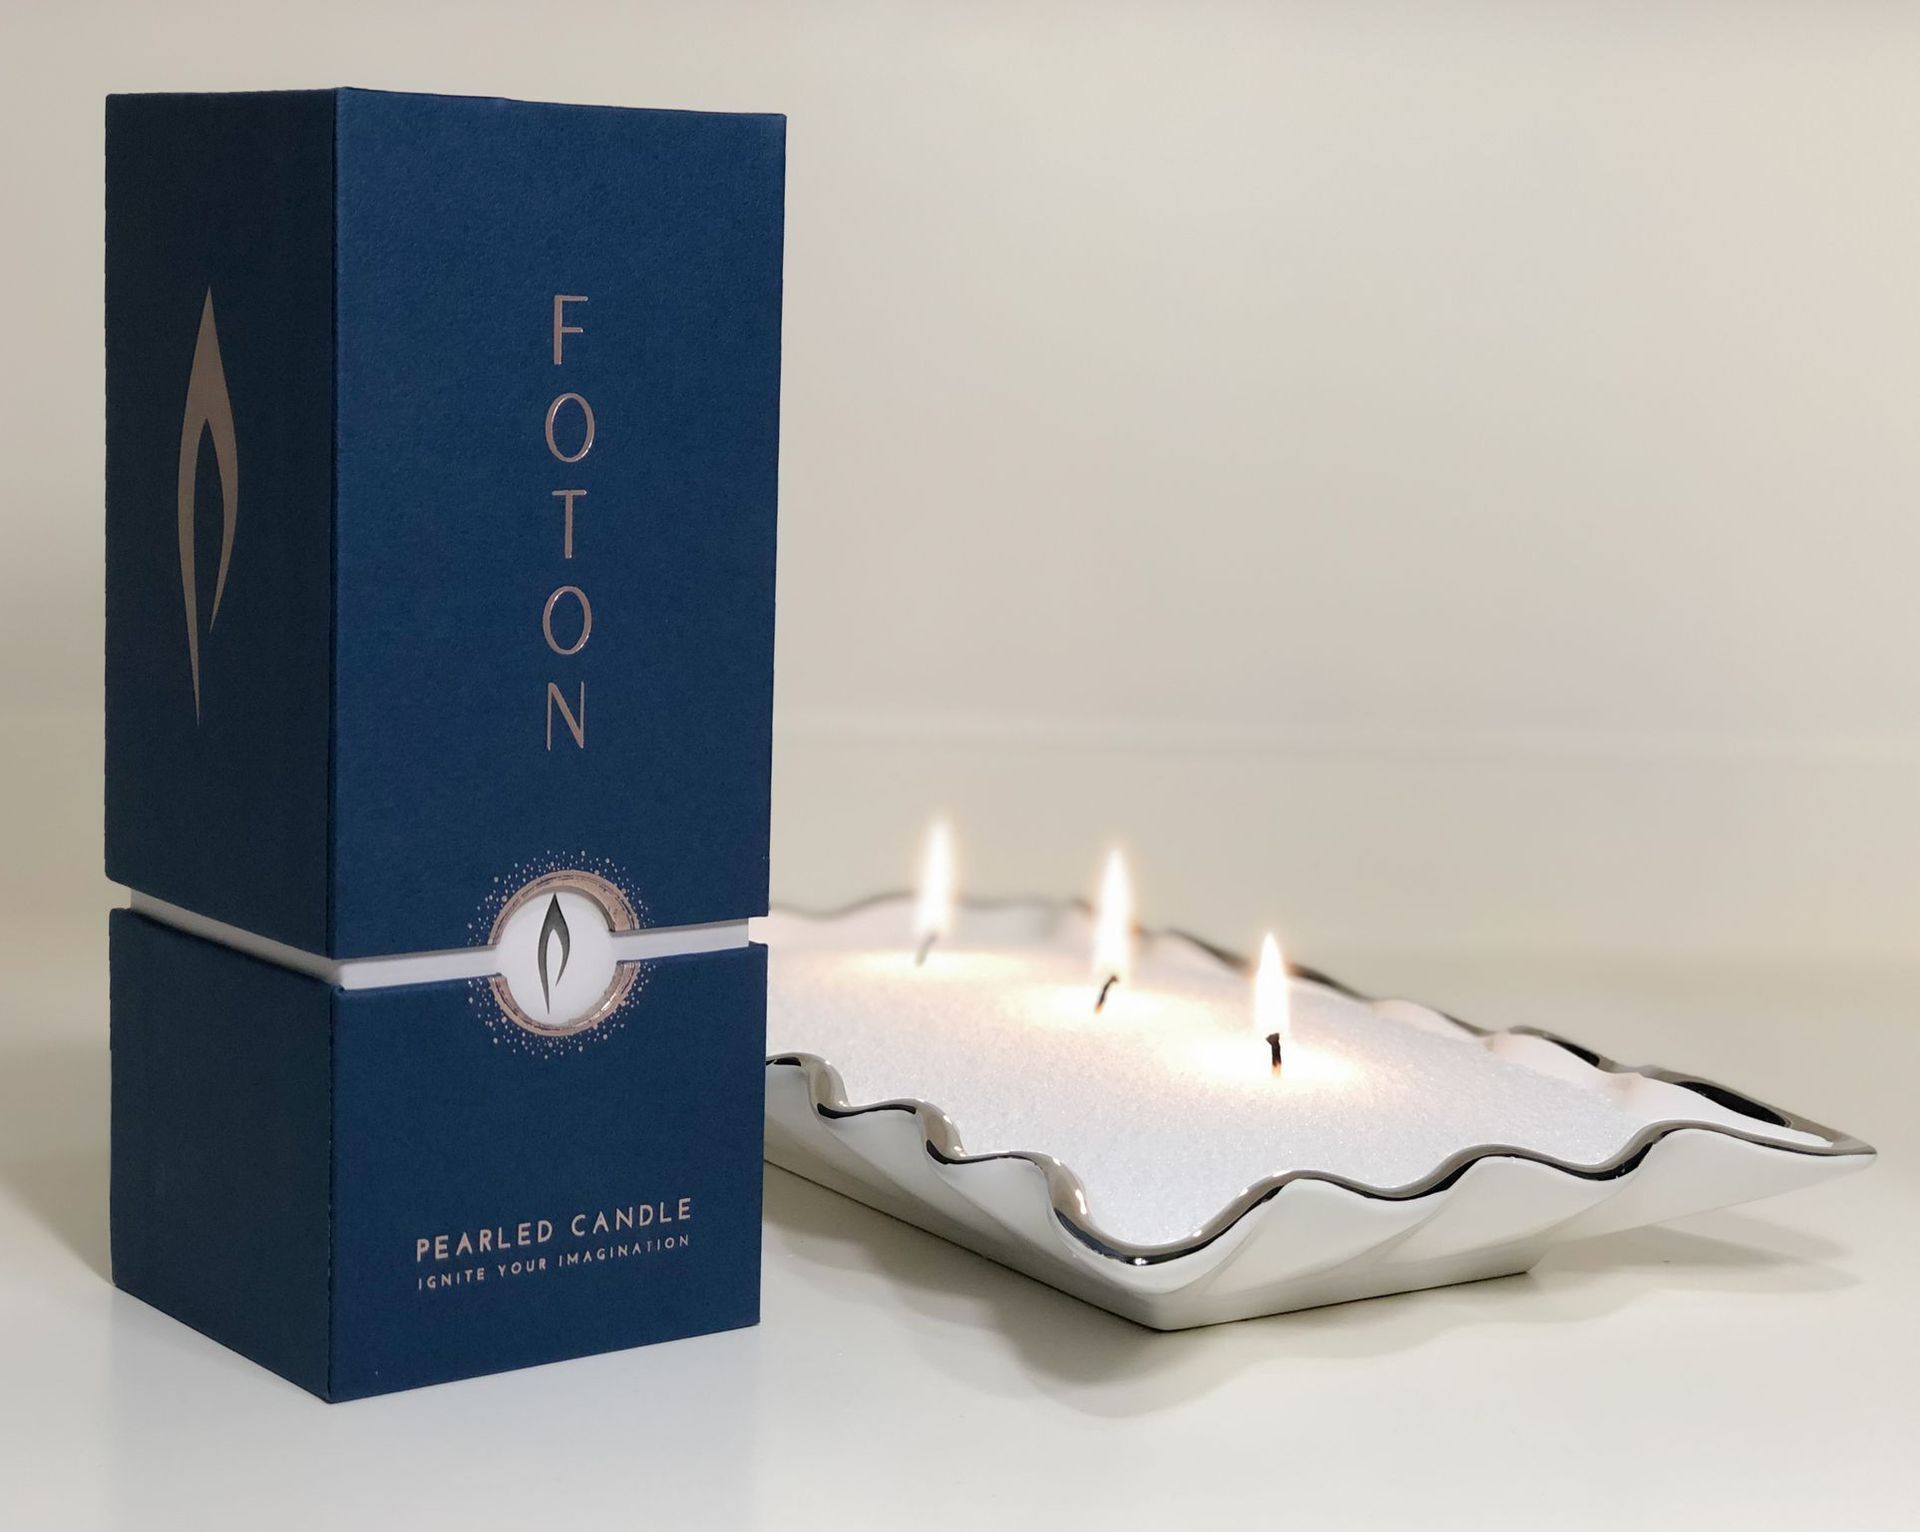 Foton Candle 